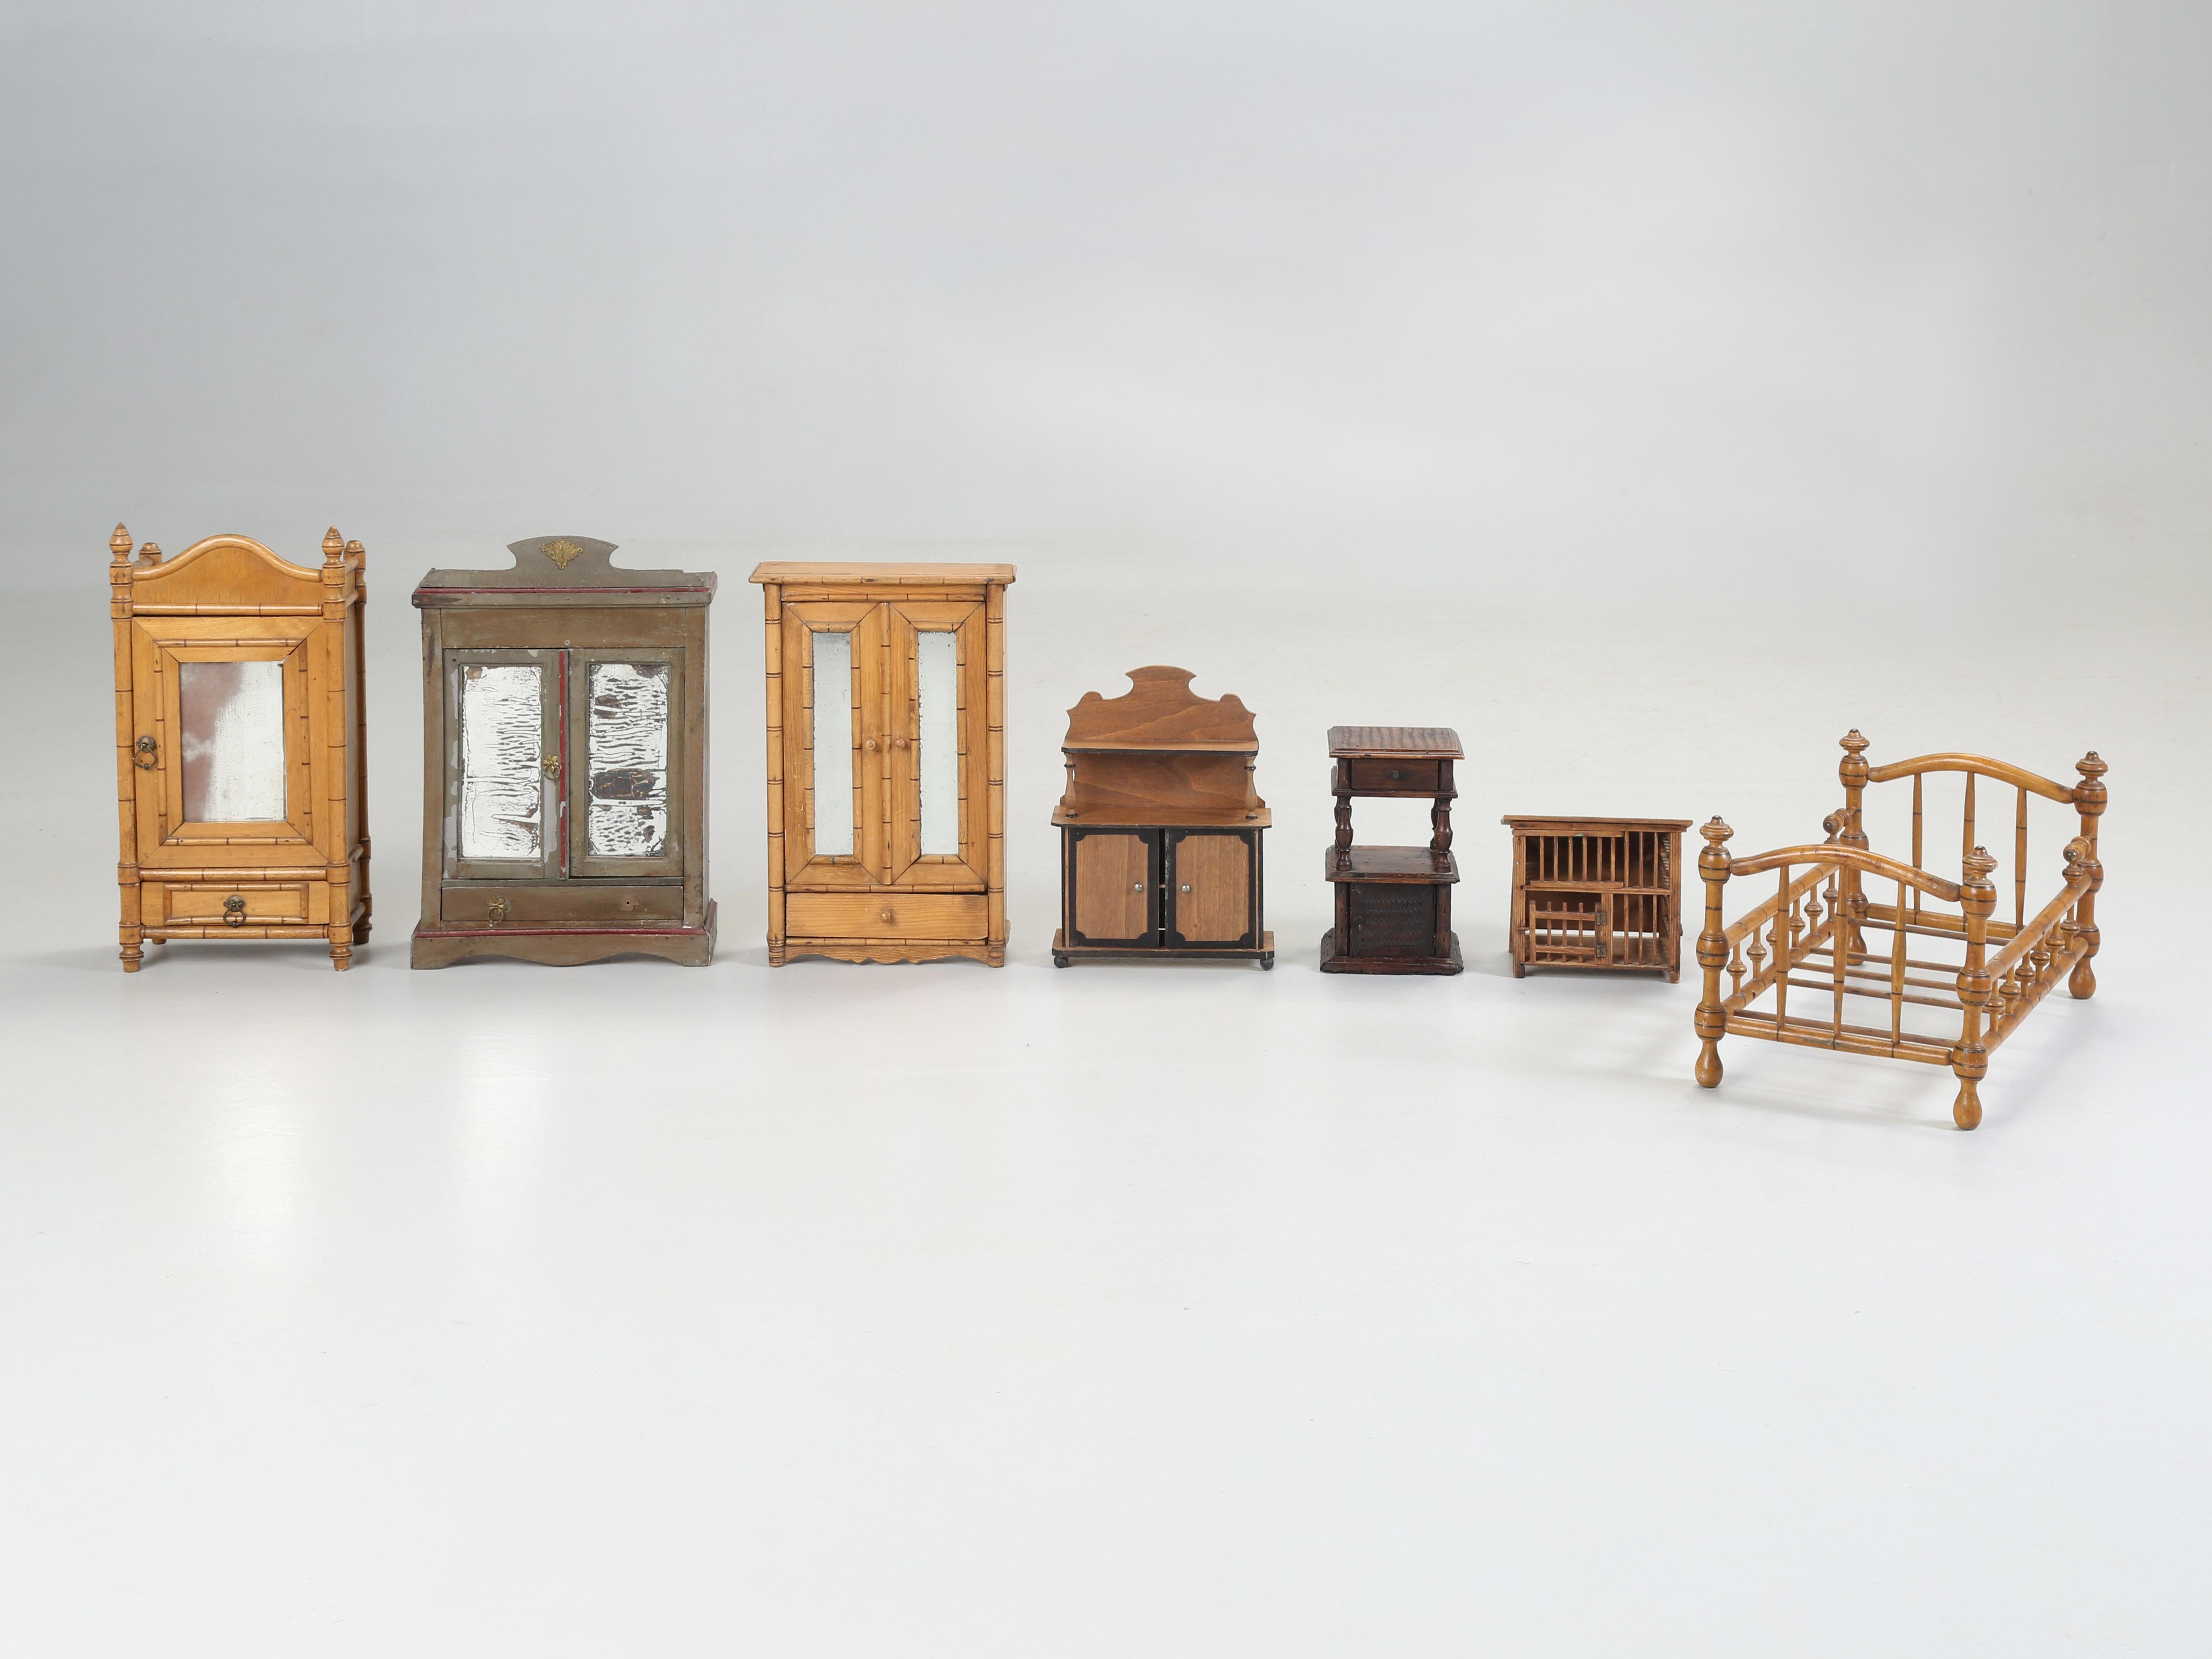 Collection of (7) mostly French Doll House Furniture or possibly Salesman's Samples or simply Child's Toys? One of the pieces was made from an American cigar box and we'd probably call that one Folk Art, but the balance appear to be very well made